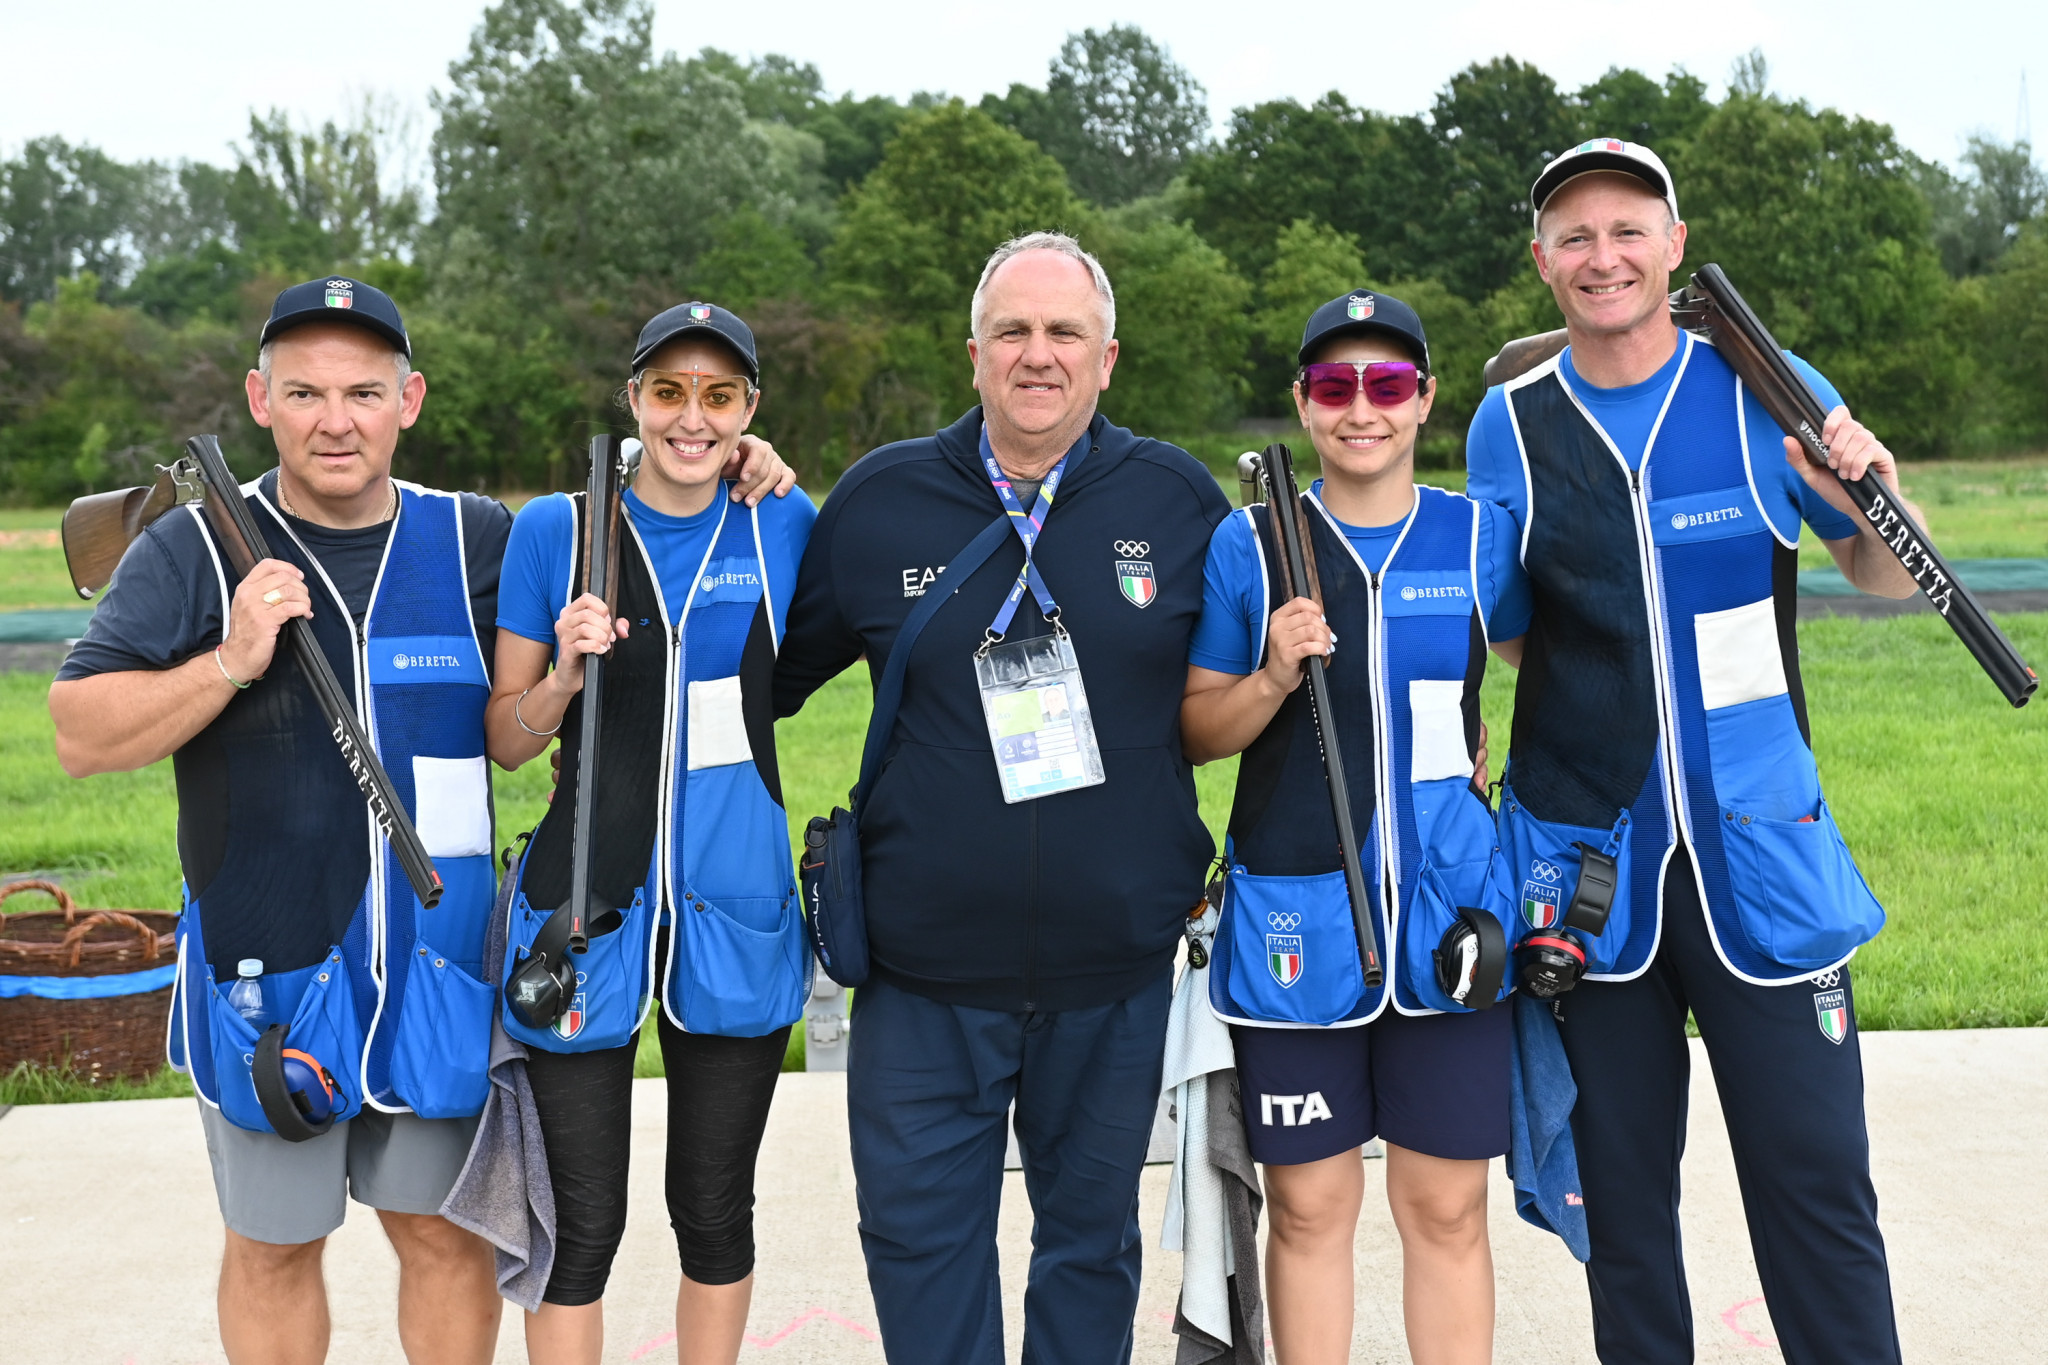 Italy earned gold and bronze in the mixed team trap to continue their domination of shooting at Kraków-Malopolska 2023 ©Kraków-Malopolska 2023